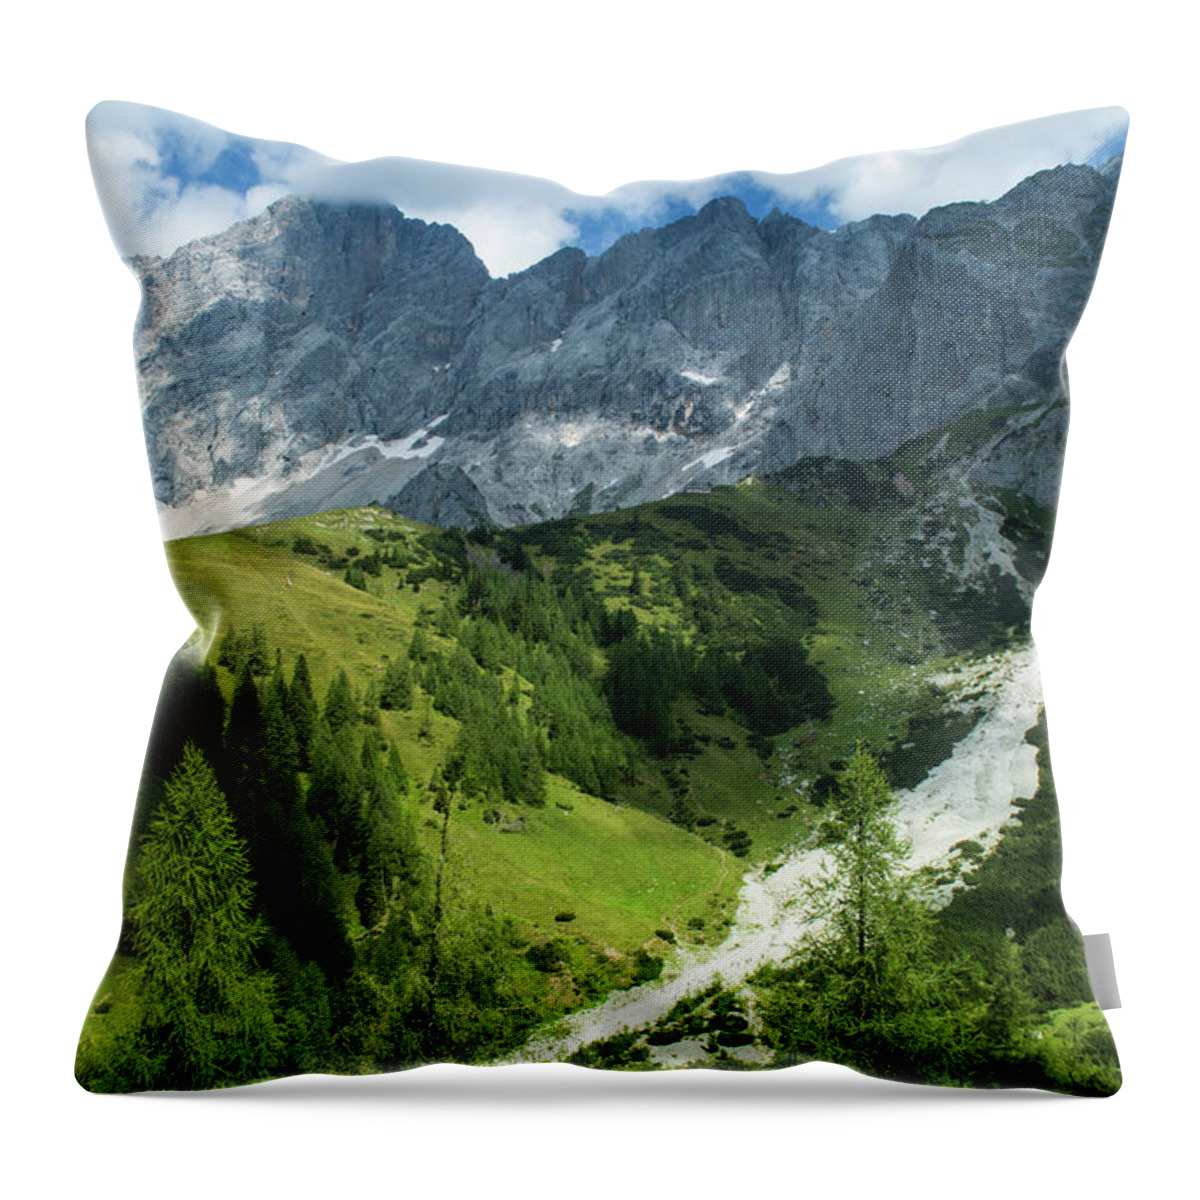 Scenics Throw Pillow featuring the photograph Dachstein, South Wall by Gikon@getty